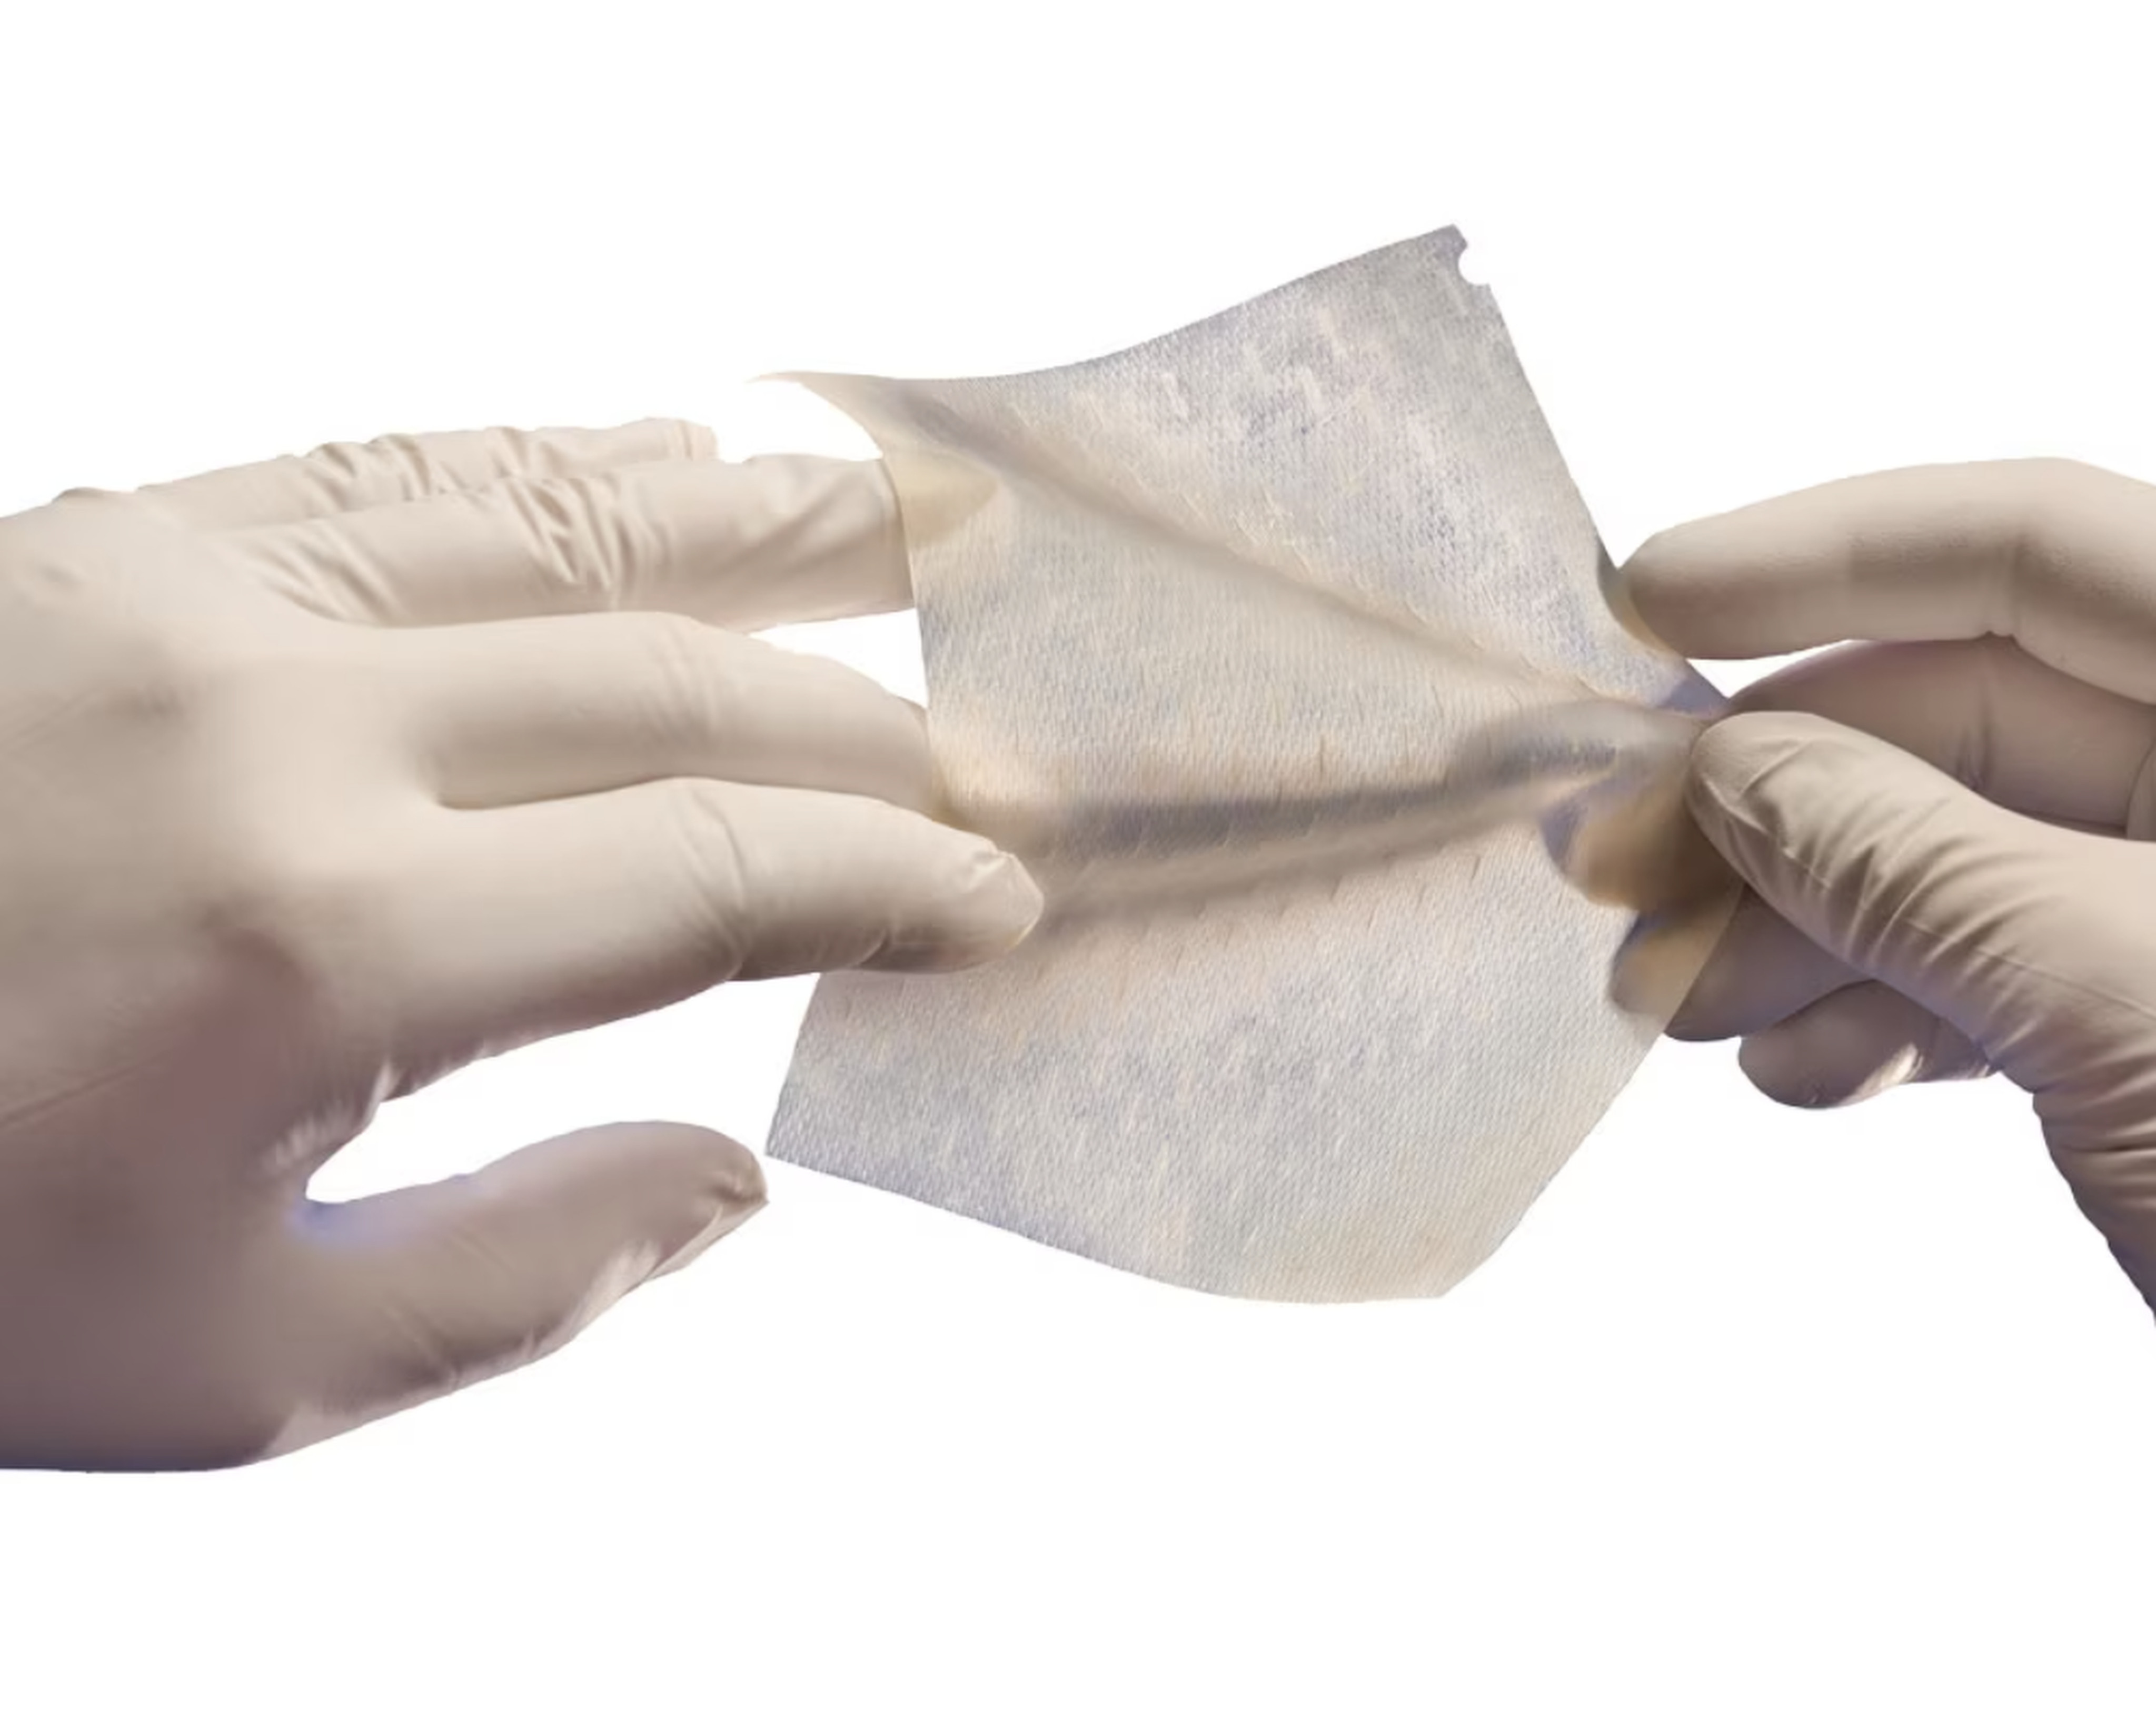 Cytal Burn Matrix is an evolution of artificial skin that is used to promote skin growth. Artificial skin’s uses have gone beyond treating burn victims to include helping fight skin cancer. Photo: Integra